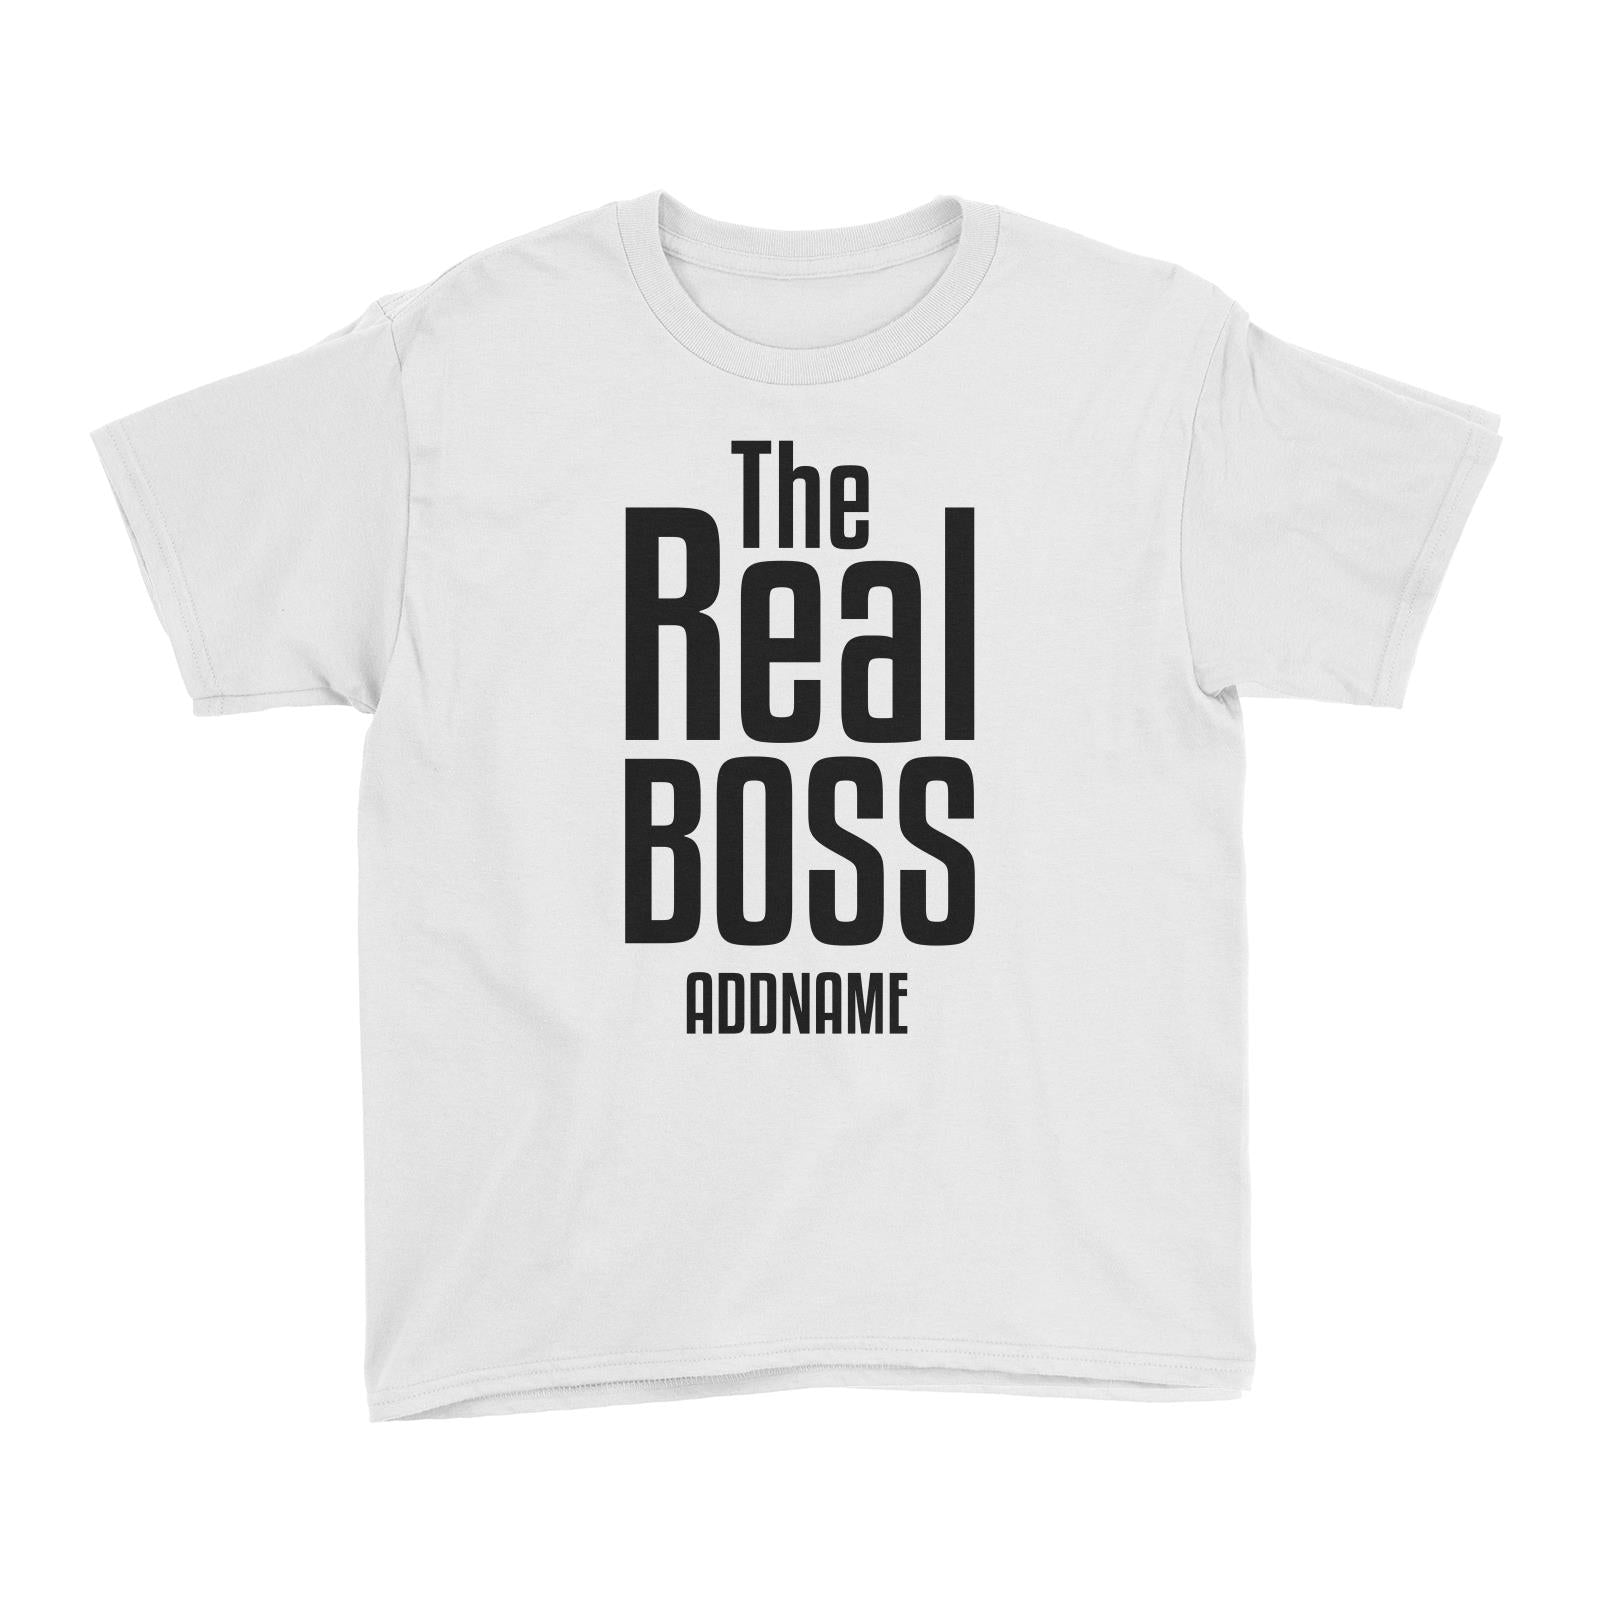 The Real Boss Kid's T-Shirt